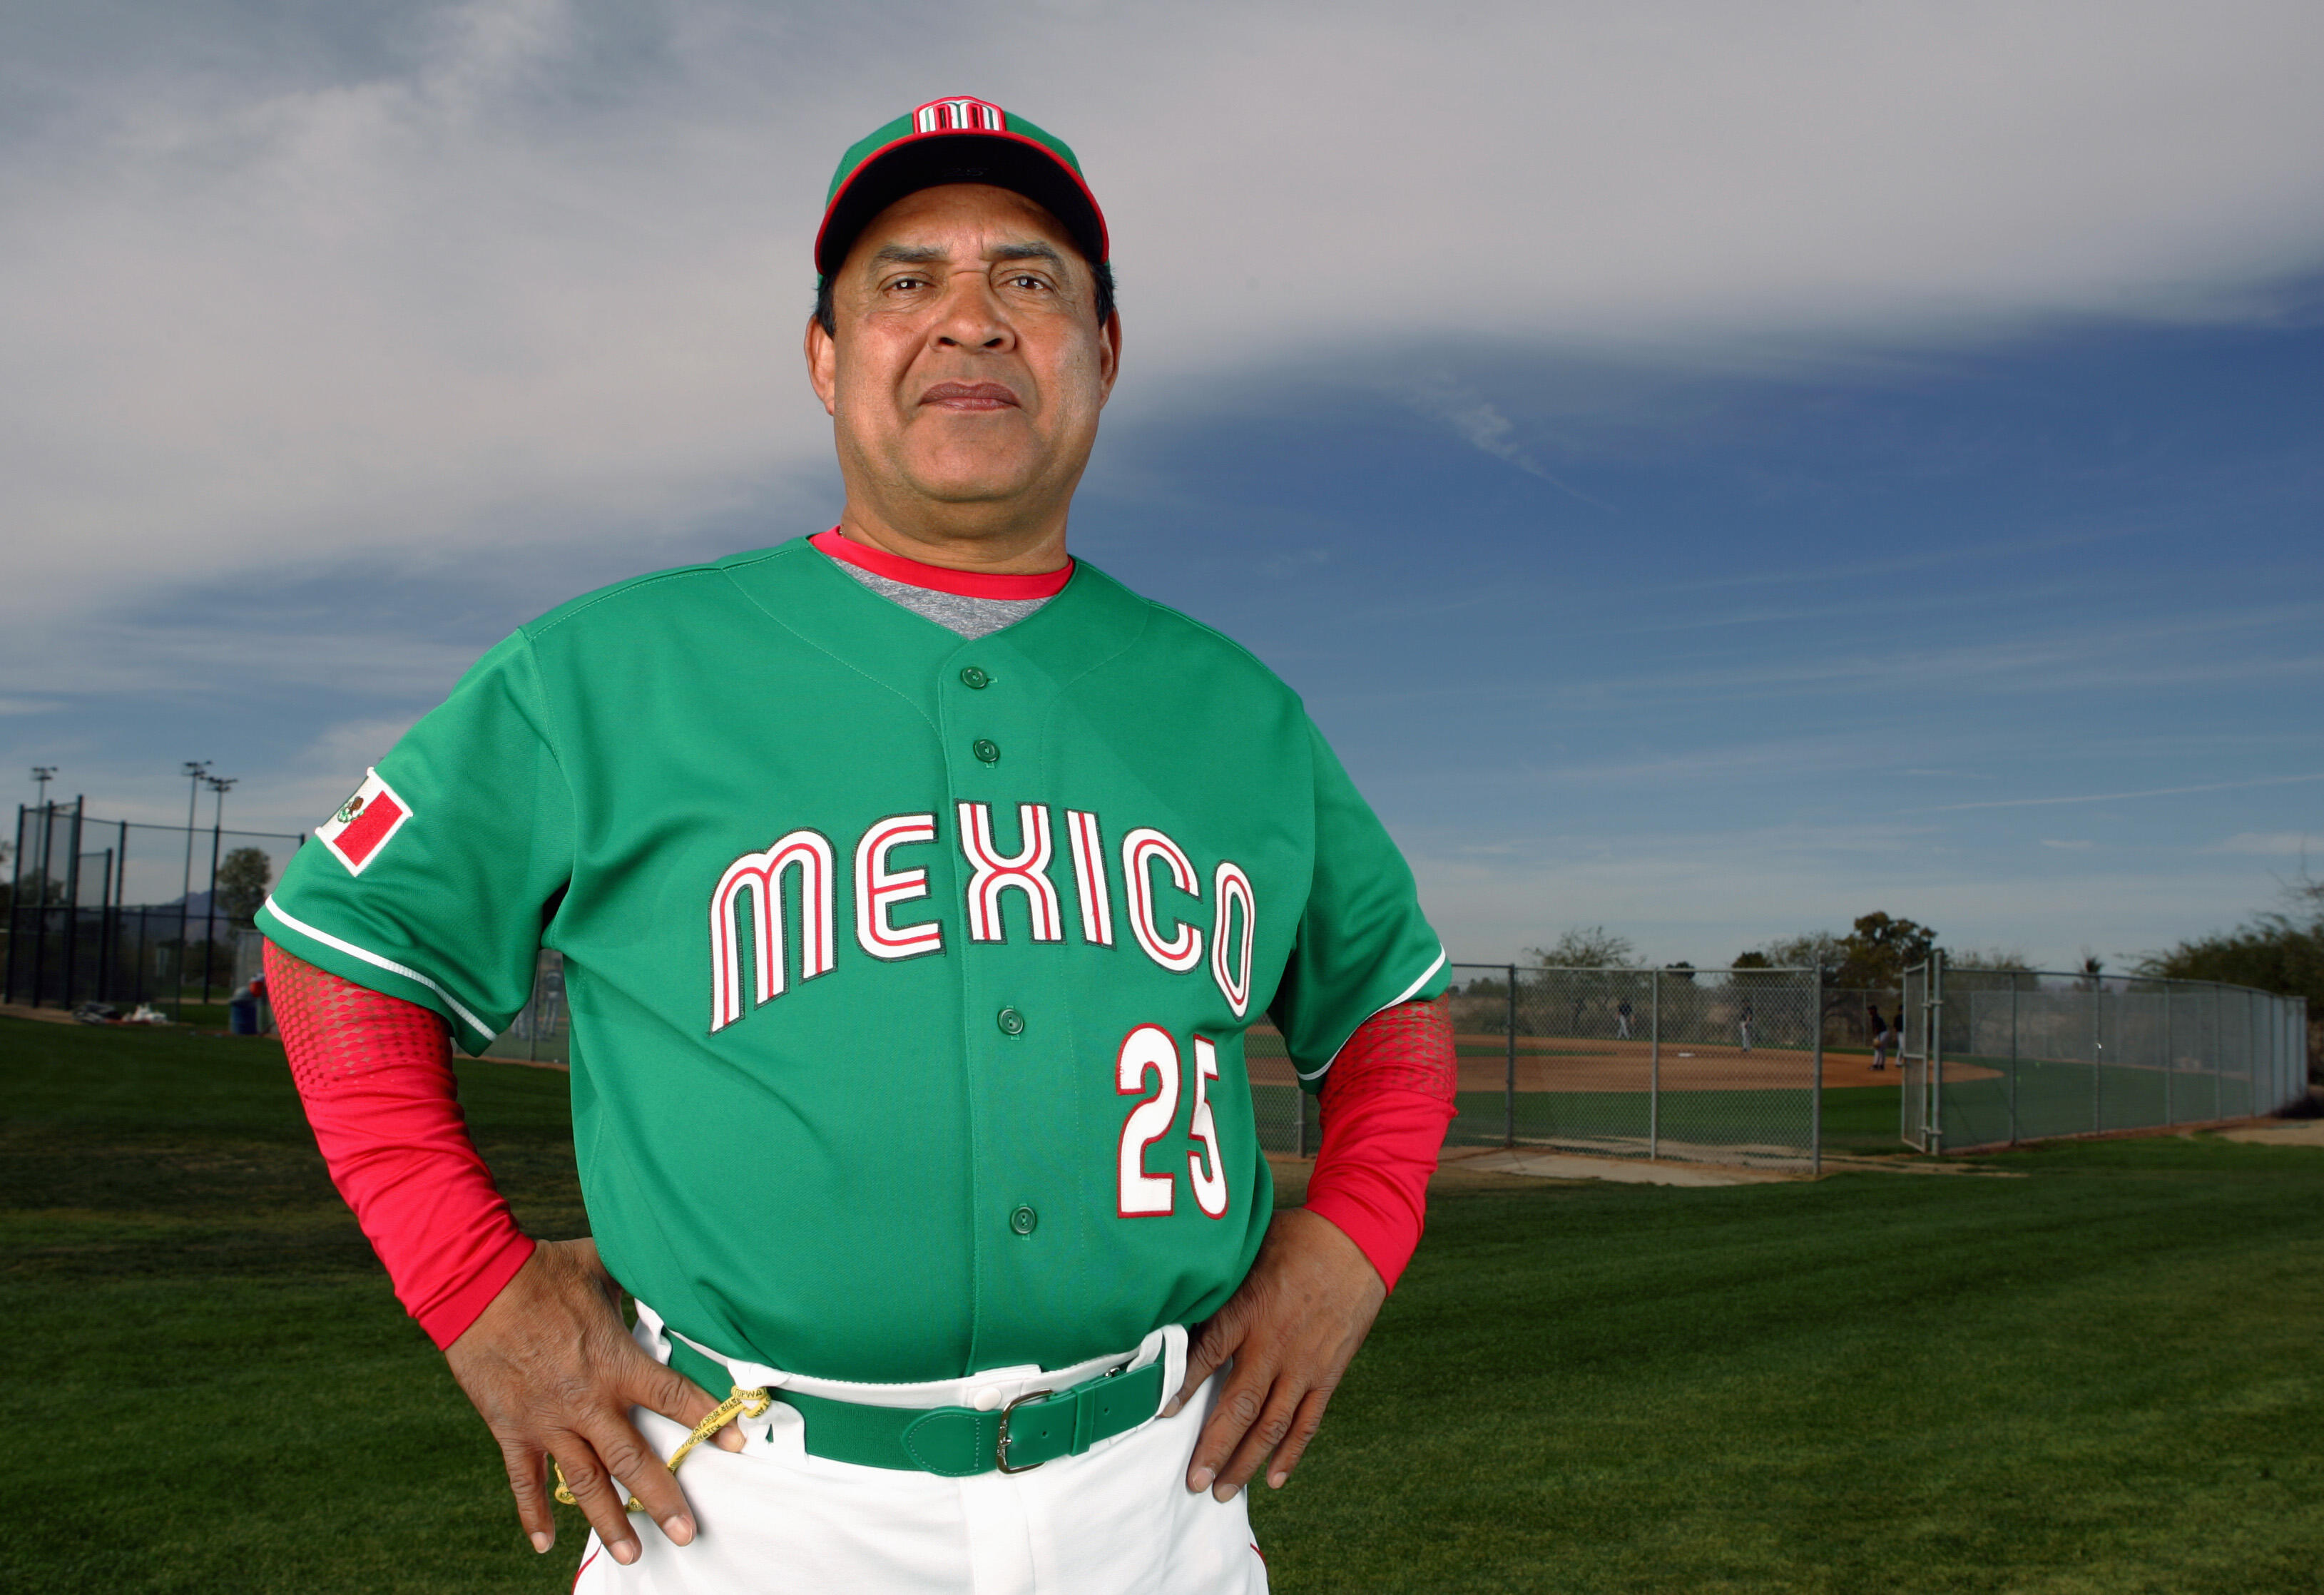 TUSCON, AZ - MARCH 5:  Coach Francisco Estrada of Mexico poses for a portrait during the World Baseball Classic Photo Day on March 5, 2006 in Tuscon, Arizona.  (Photo by Lisa Blumenfeld/Getty Images)